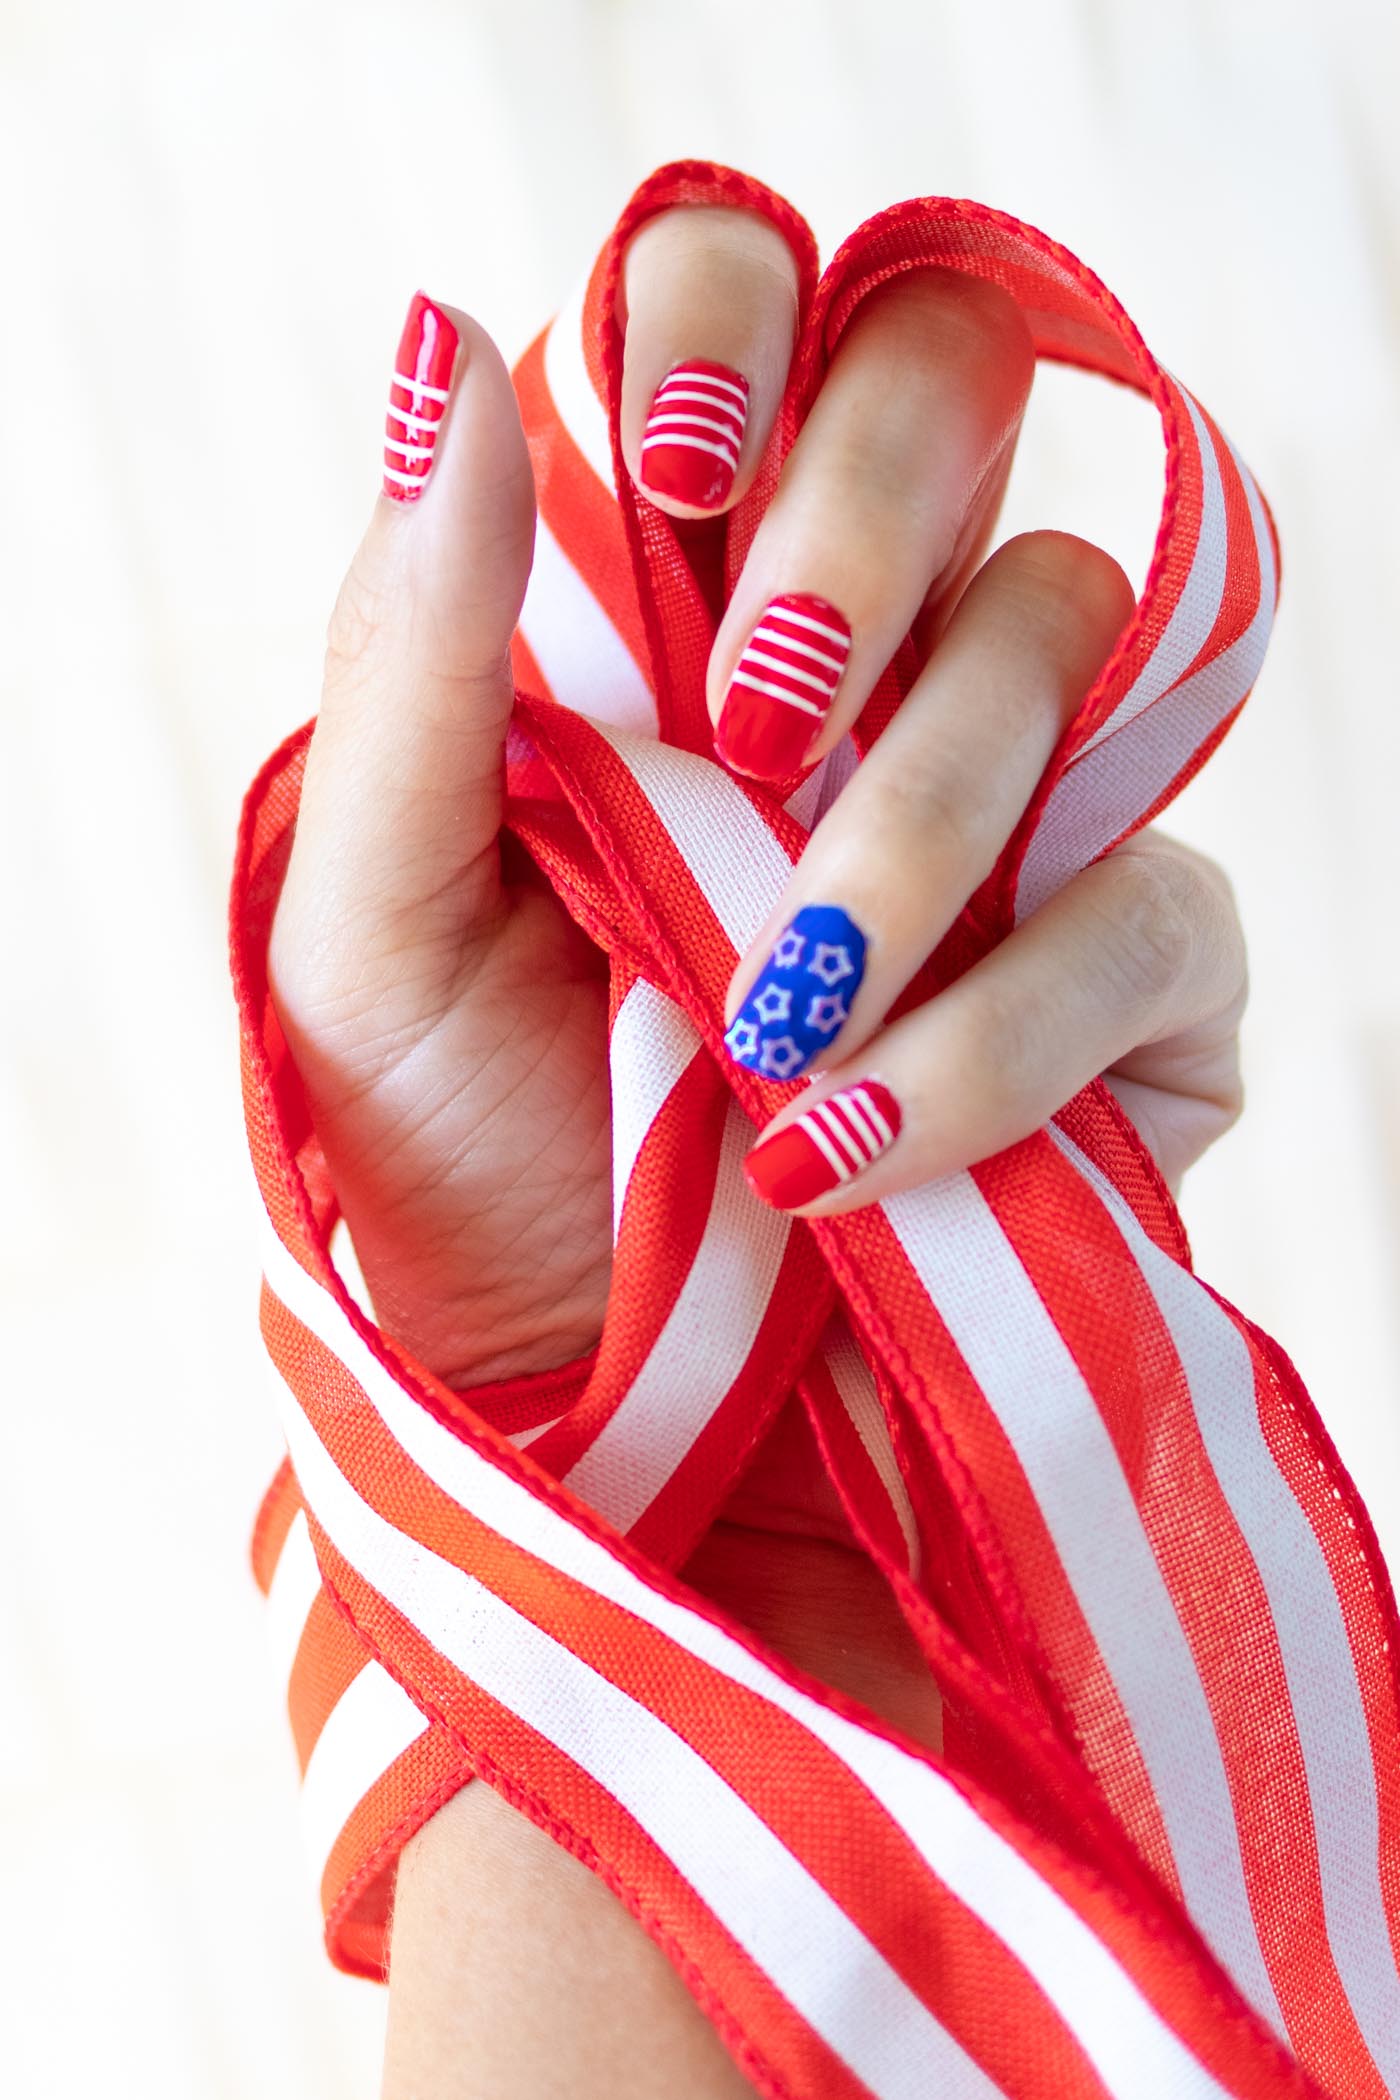 Try these simple 4th of July nails! Give yourself a DIY manicure for Independence Day with your favorite nail polishes! // #4thofjuly #nailideas #manicure #nailpolish #diybeauty